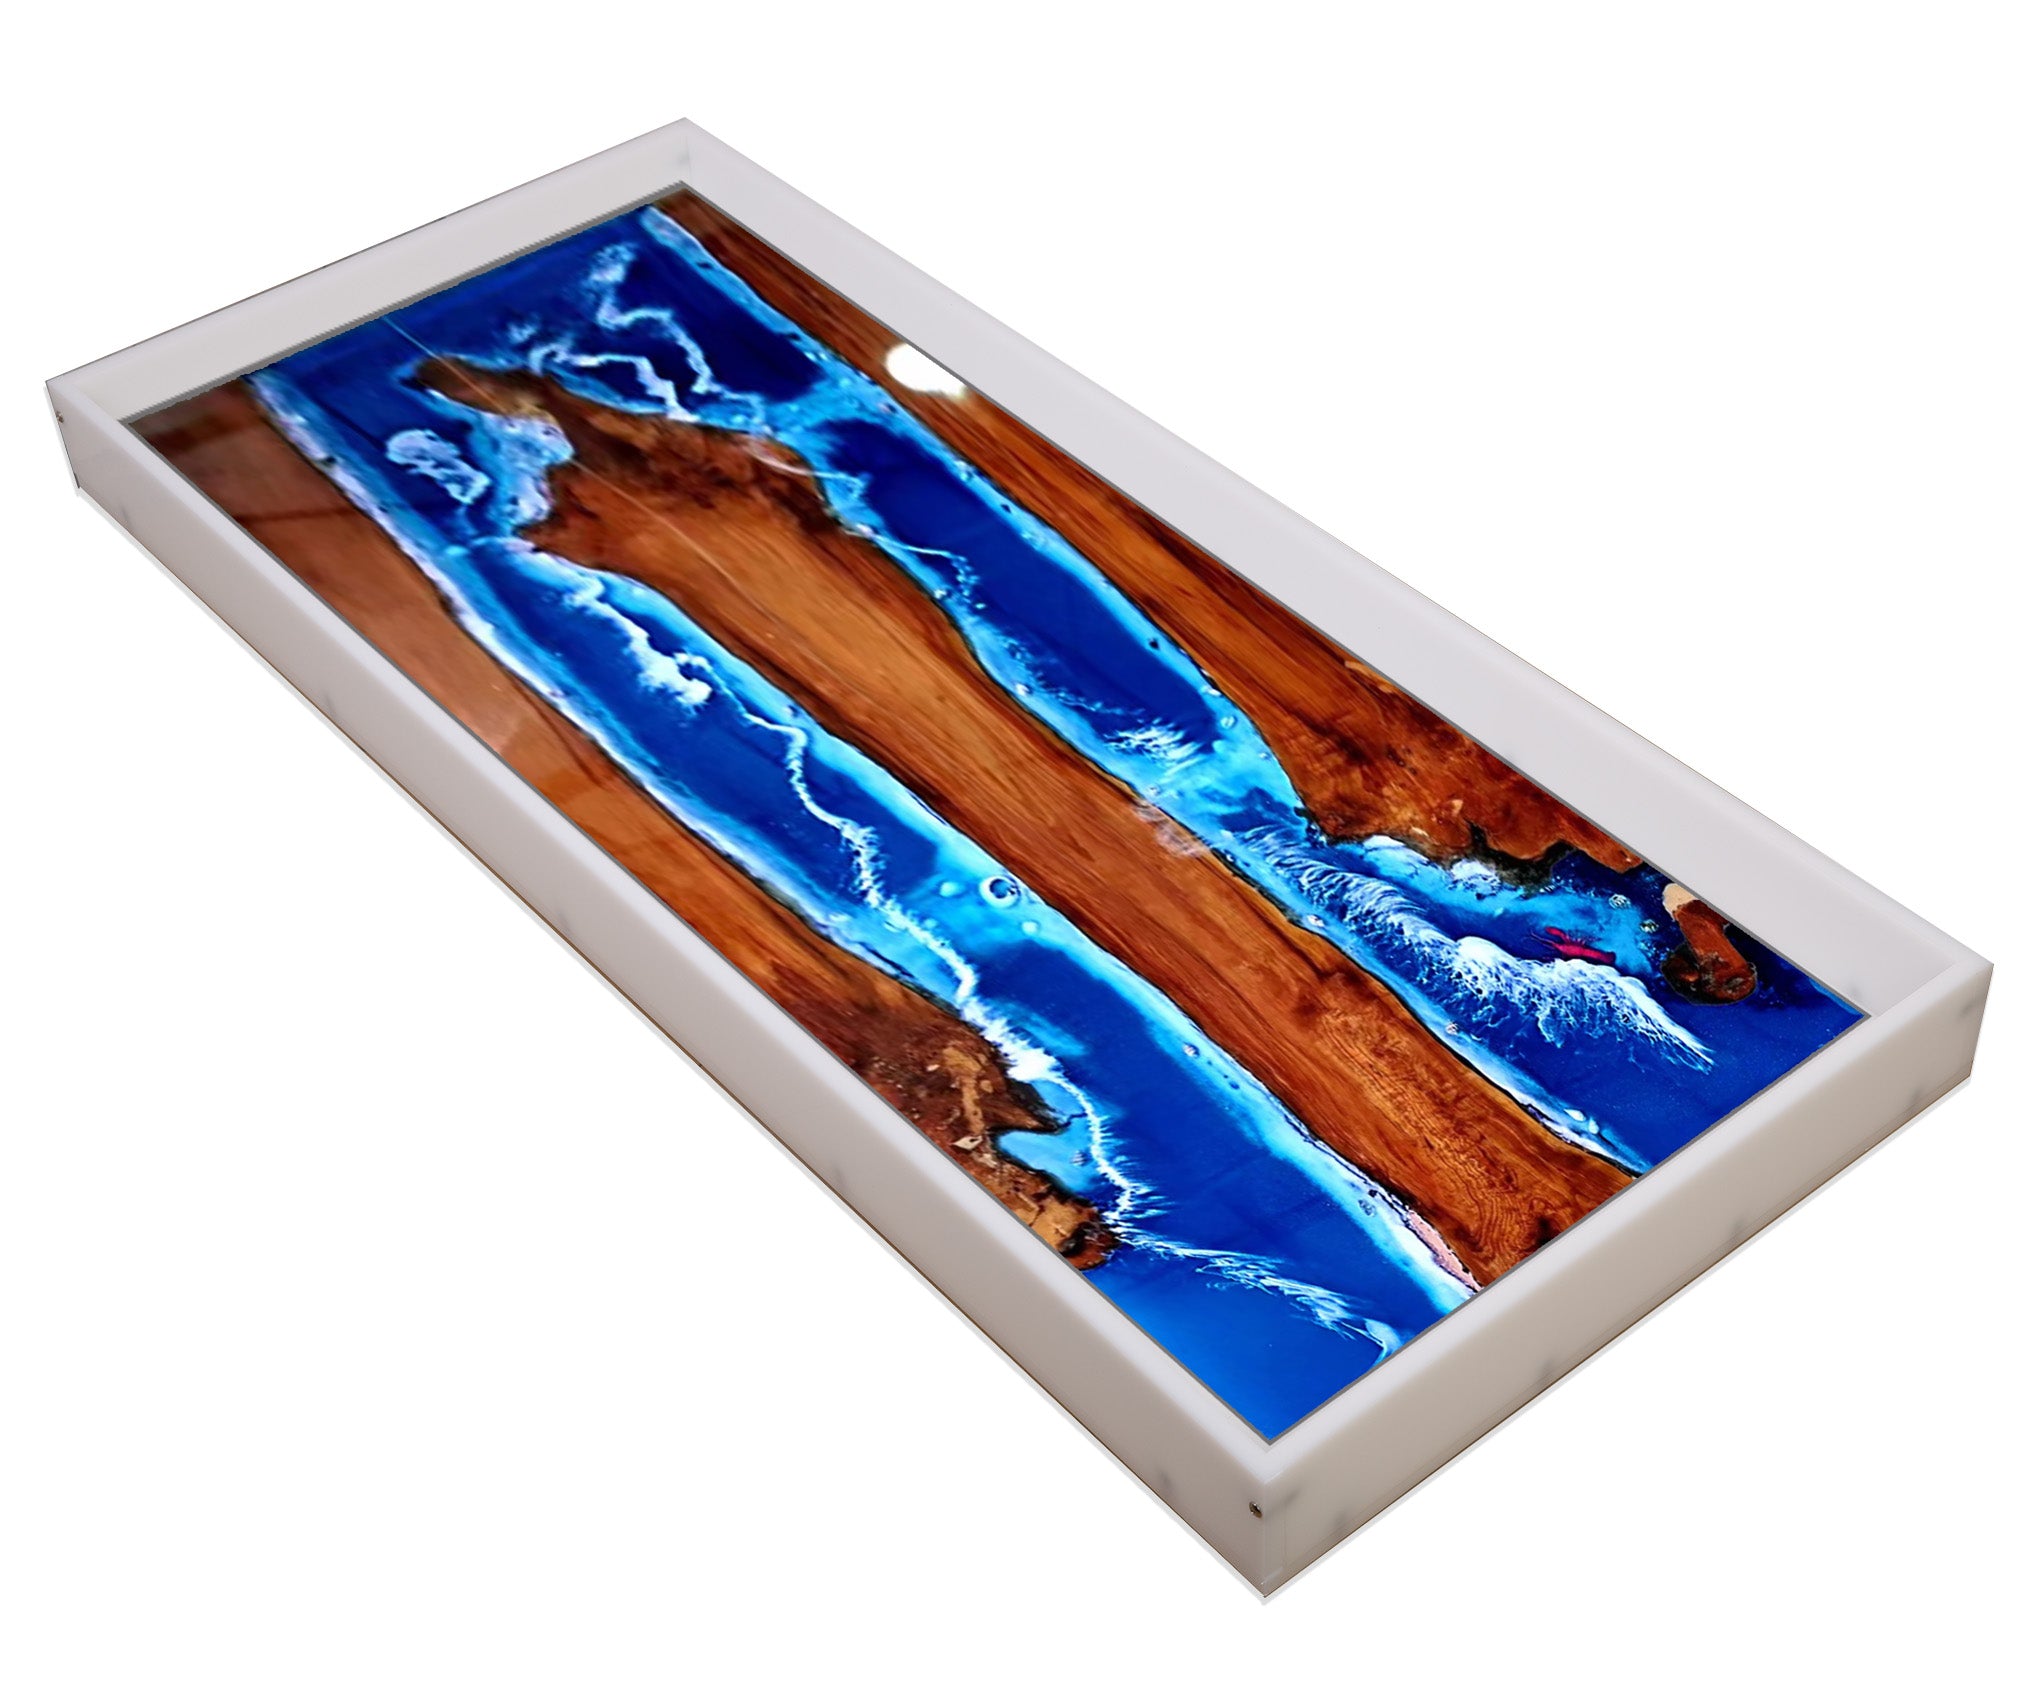 Kalinta Reusable Extra Large Resin Mold, 18x10x3 Inches Epoxy River Table  Mold, 1/2 Thick Premium High Density Material for Making Coffee River